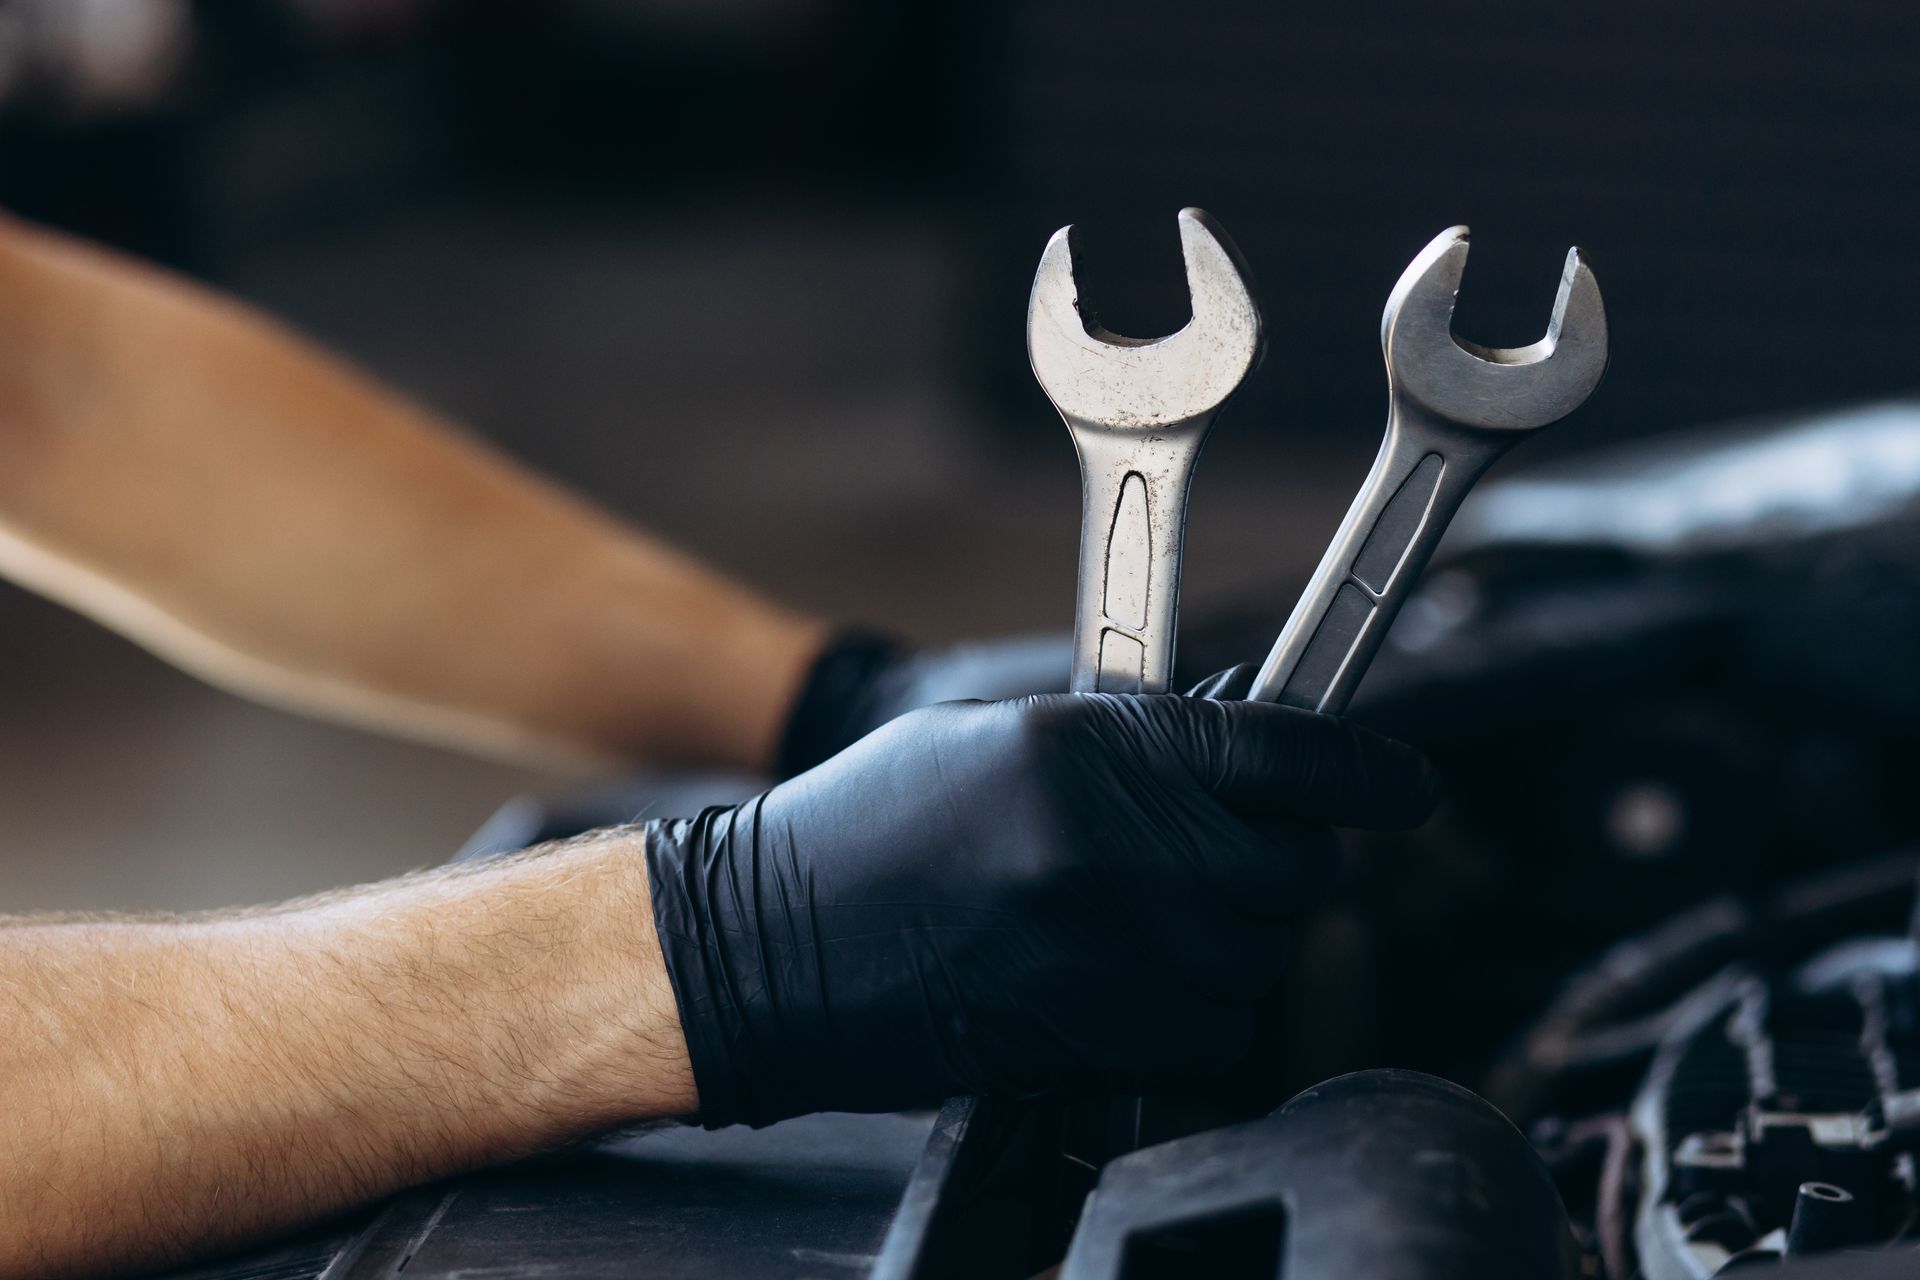 Mechanic is holding two wrenches